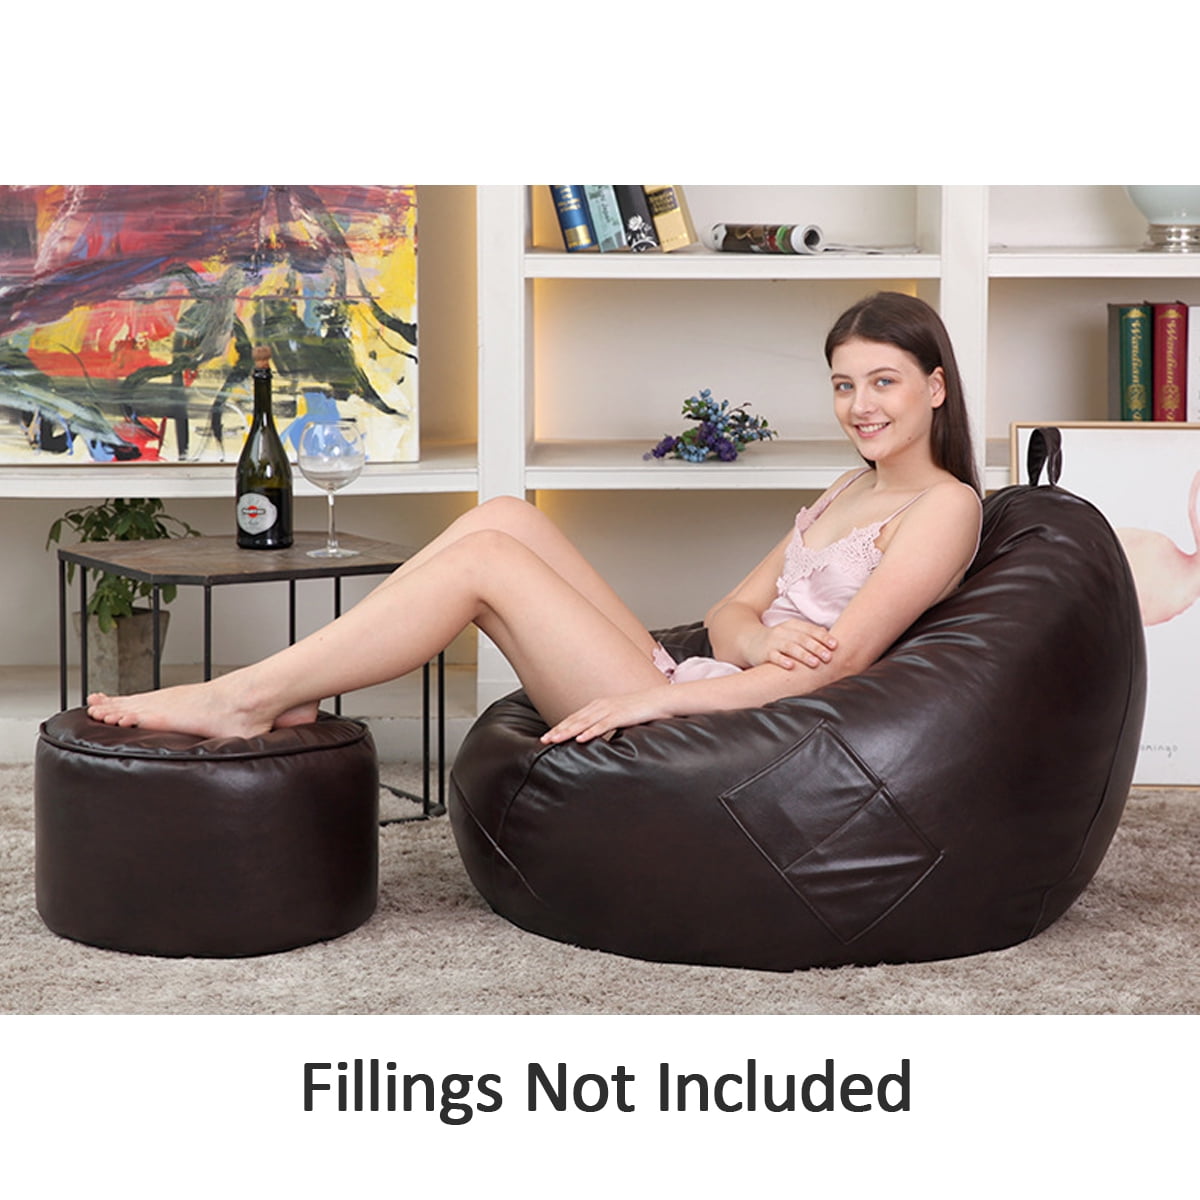 Large Soft Bean Bag Chairs Pu Leather, Toddler Leather Bean Bag Chair